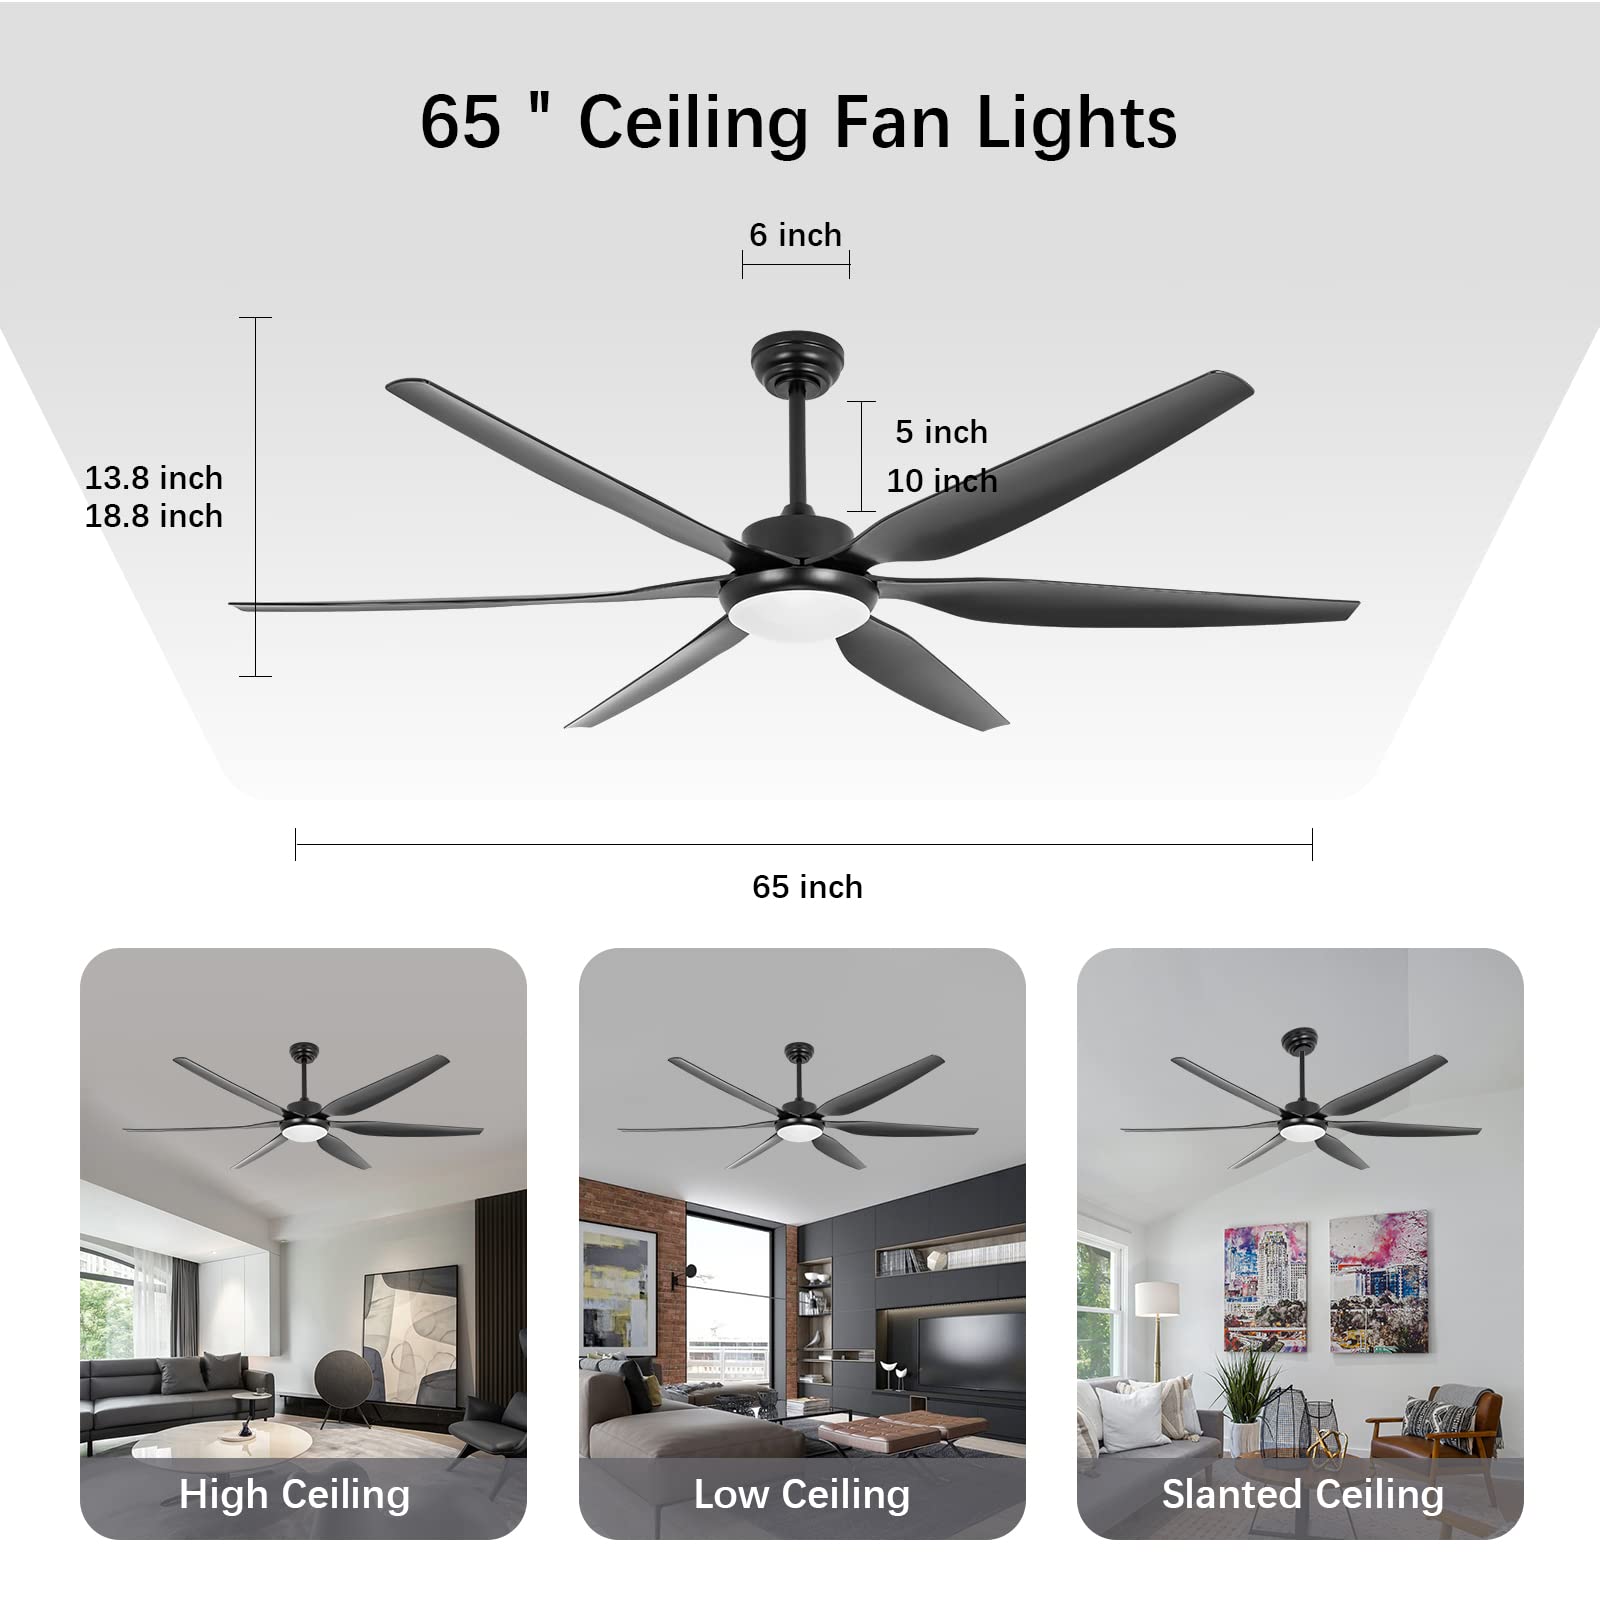 Wozzio 65 Inch Ceiling Fan with Lights and Remote,6 Blades,Reversible,6 Speed Noiseless DC Motor,Large Ceiling Fan Black for Indoor Outdoor Bedroom/Patios/Farmhouse